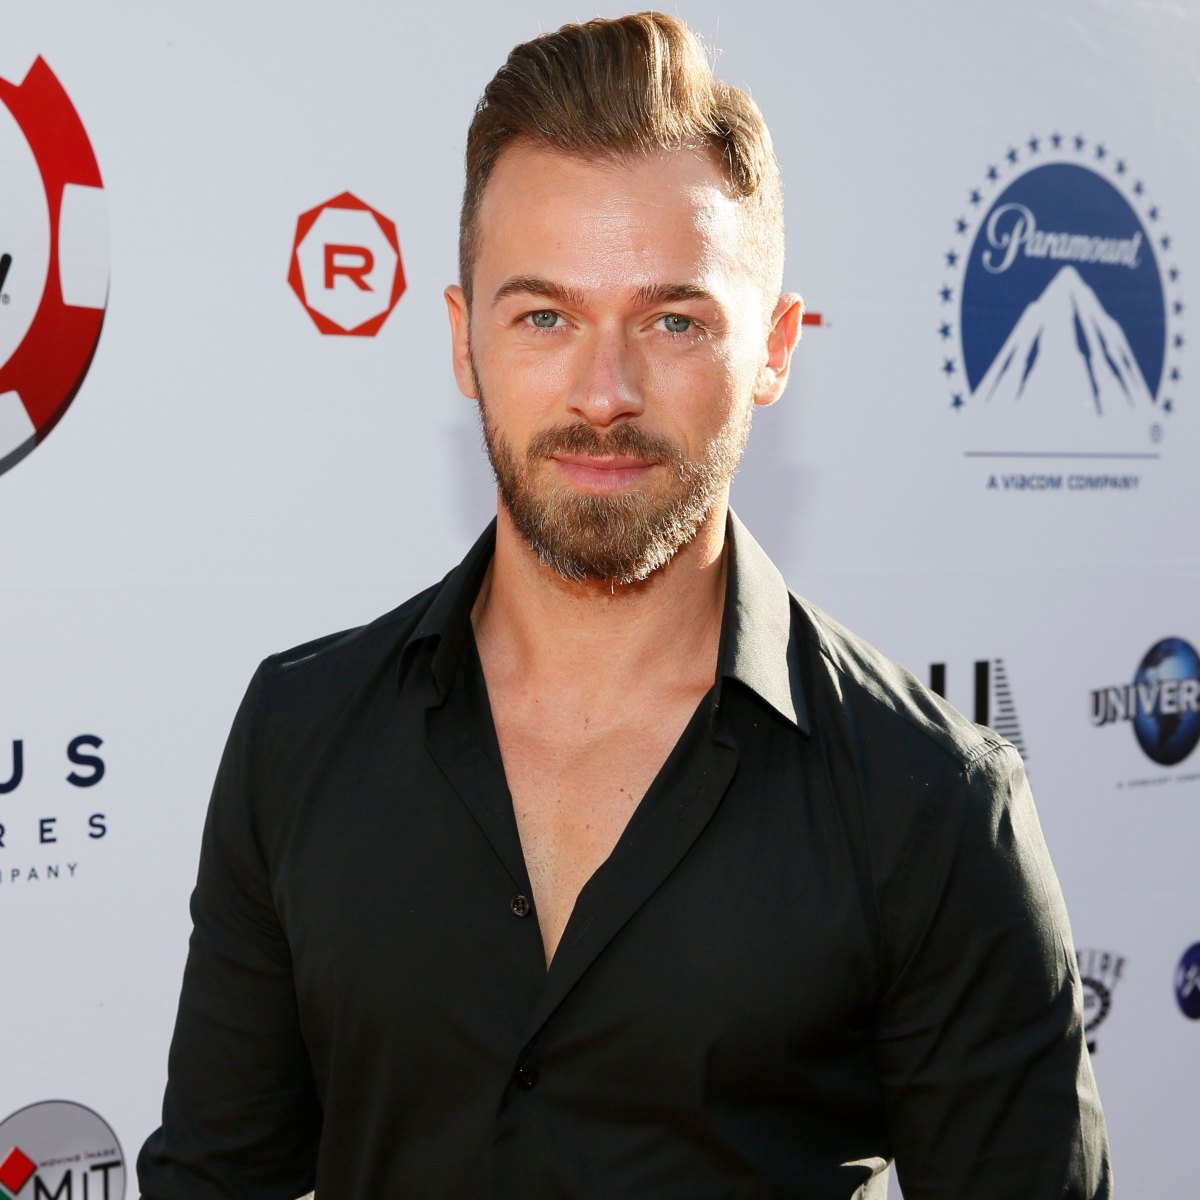 Artem Chigvintsev I Won’t Watch ‘DWTS’ After Being Cut UsWeekly